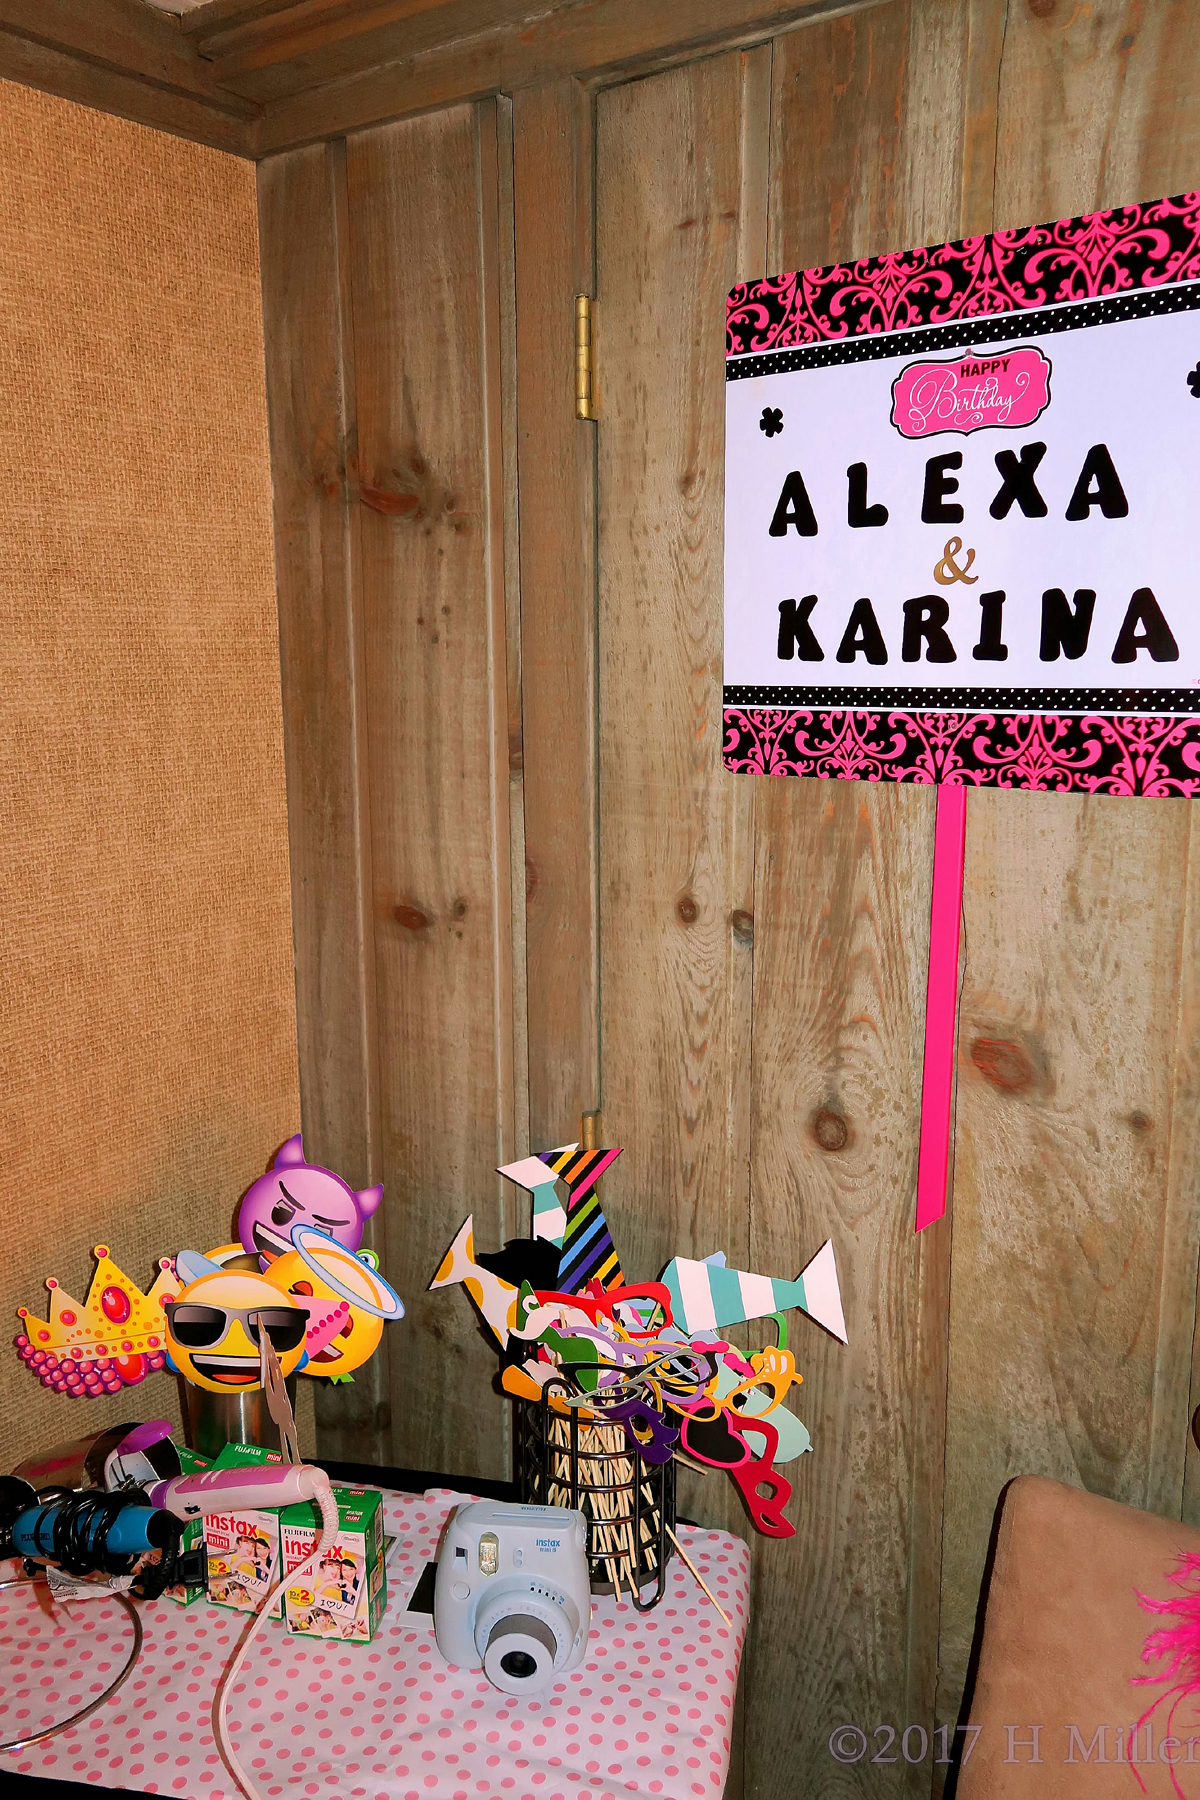 The Birthday Banner And Selfie Photo Station, Complete With Photo Props For Fun Photos! 